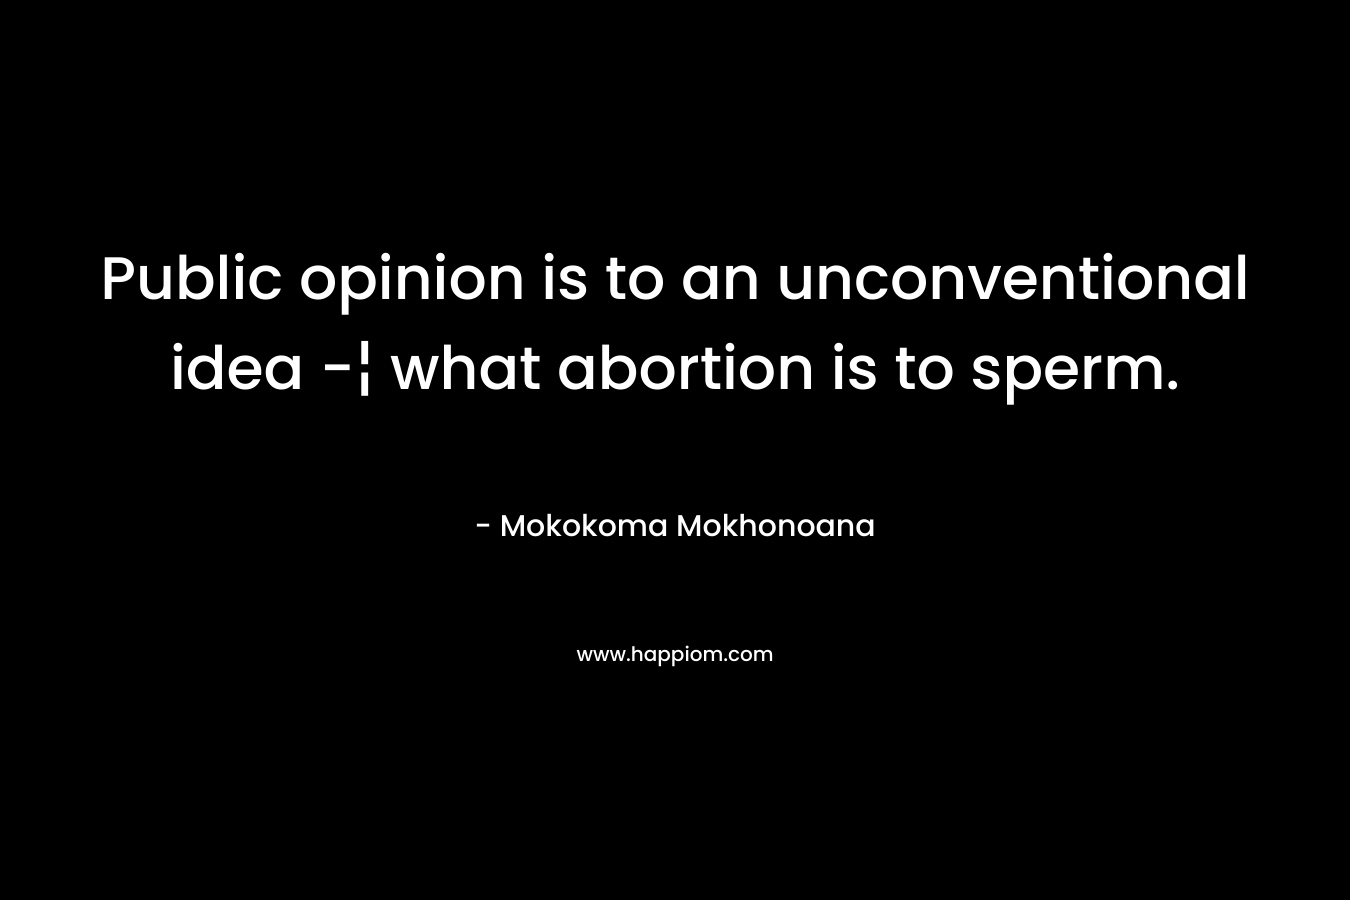 Public opinion is to an unconventional idea -¦ what abortion is to sperm.